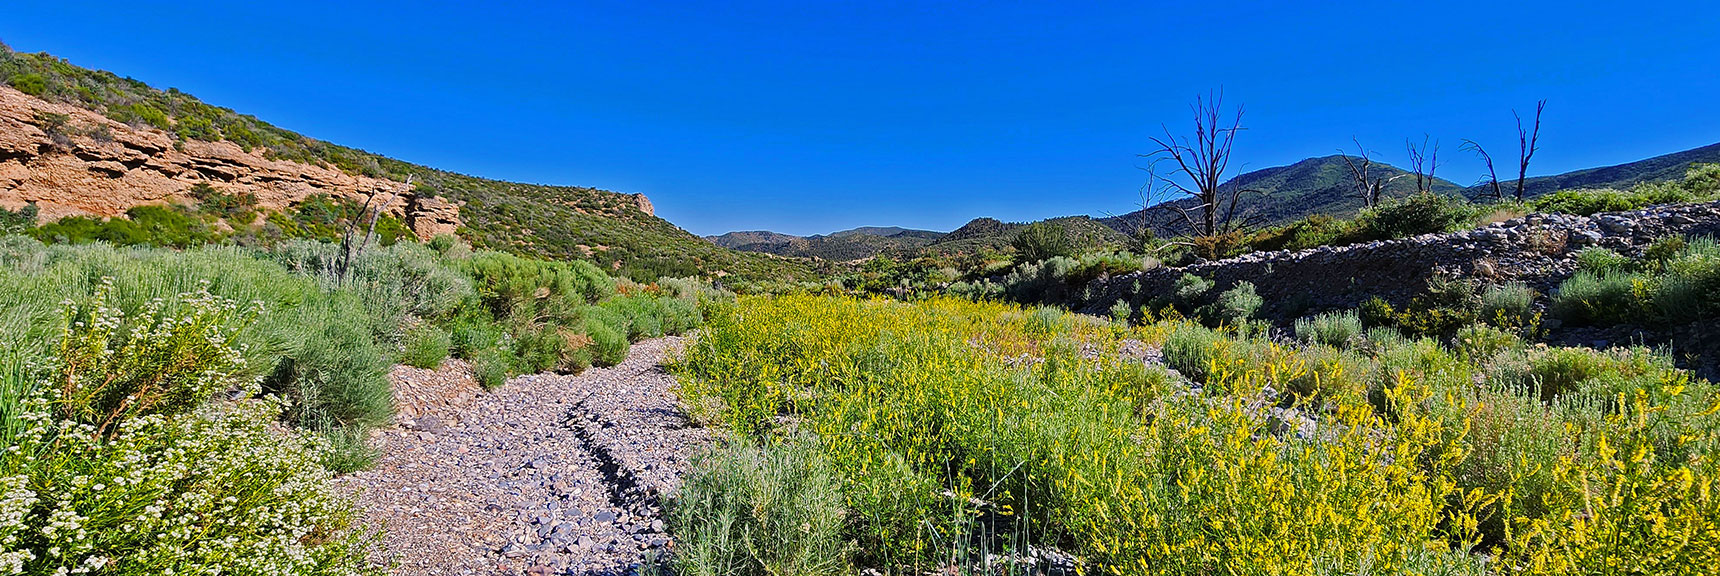 Down-Canyon View, Fields of Flowers Carpet the Wash. | Wilson Ridge Lovell Canyon Loop | Lovell Canyon, Nevada